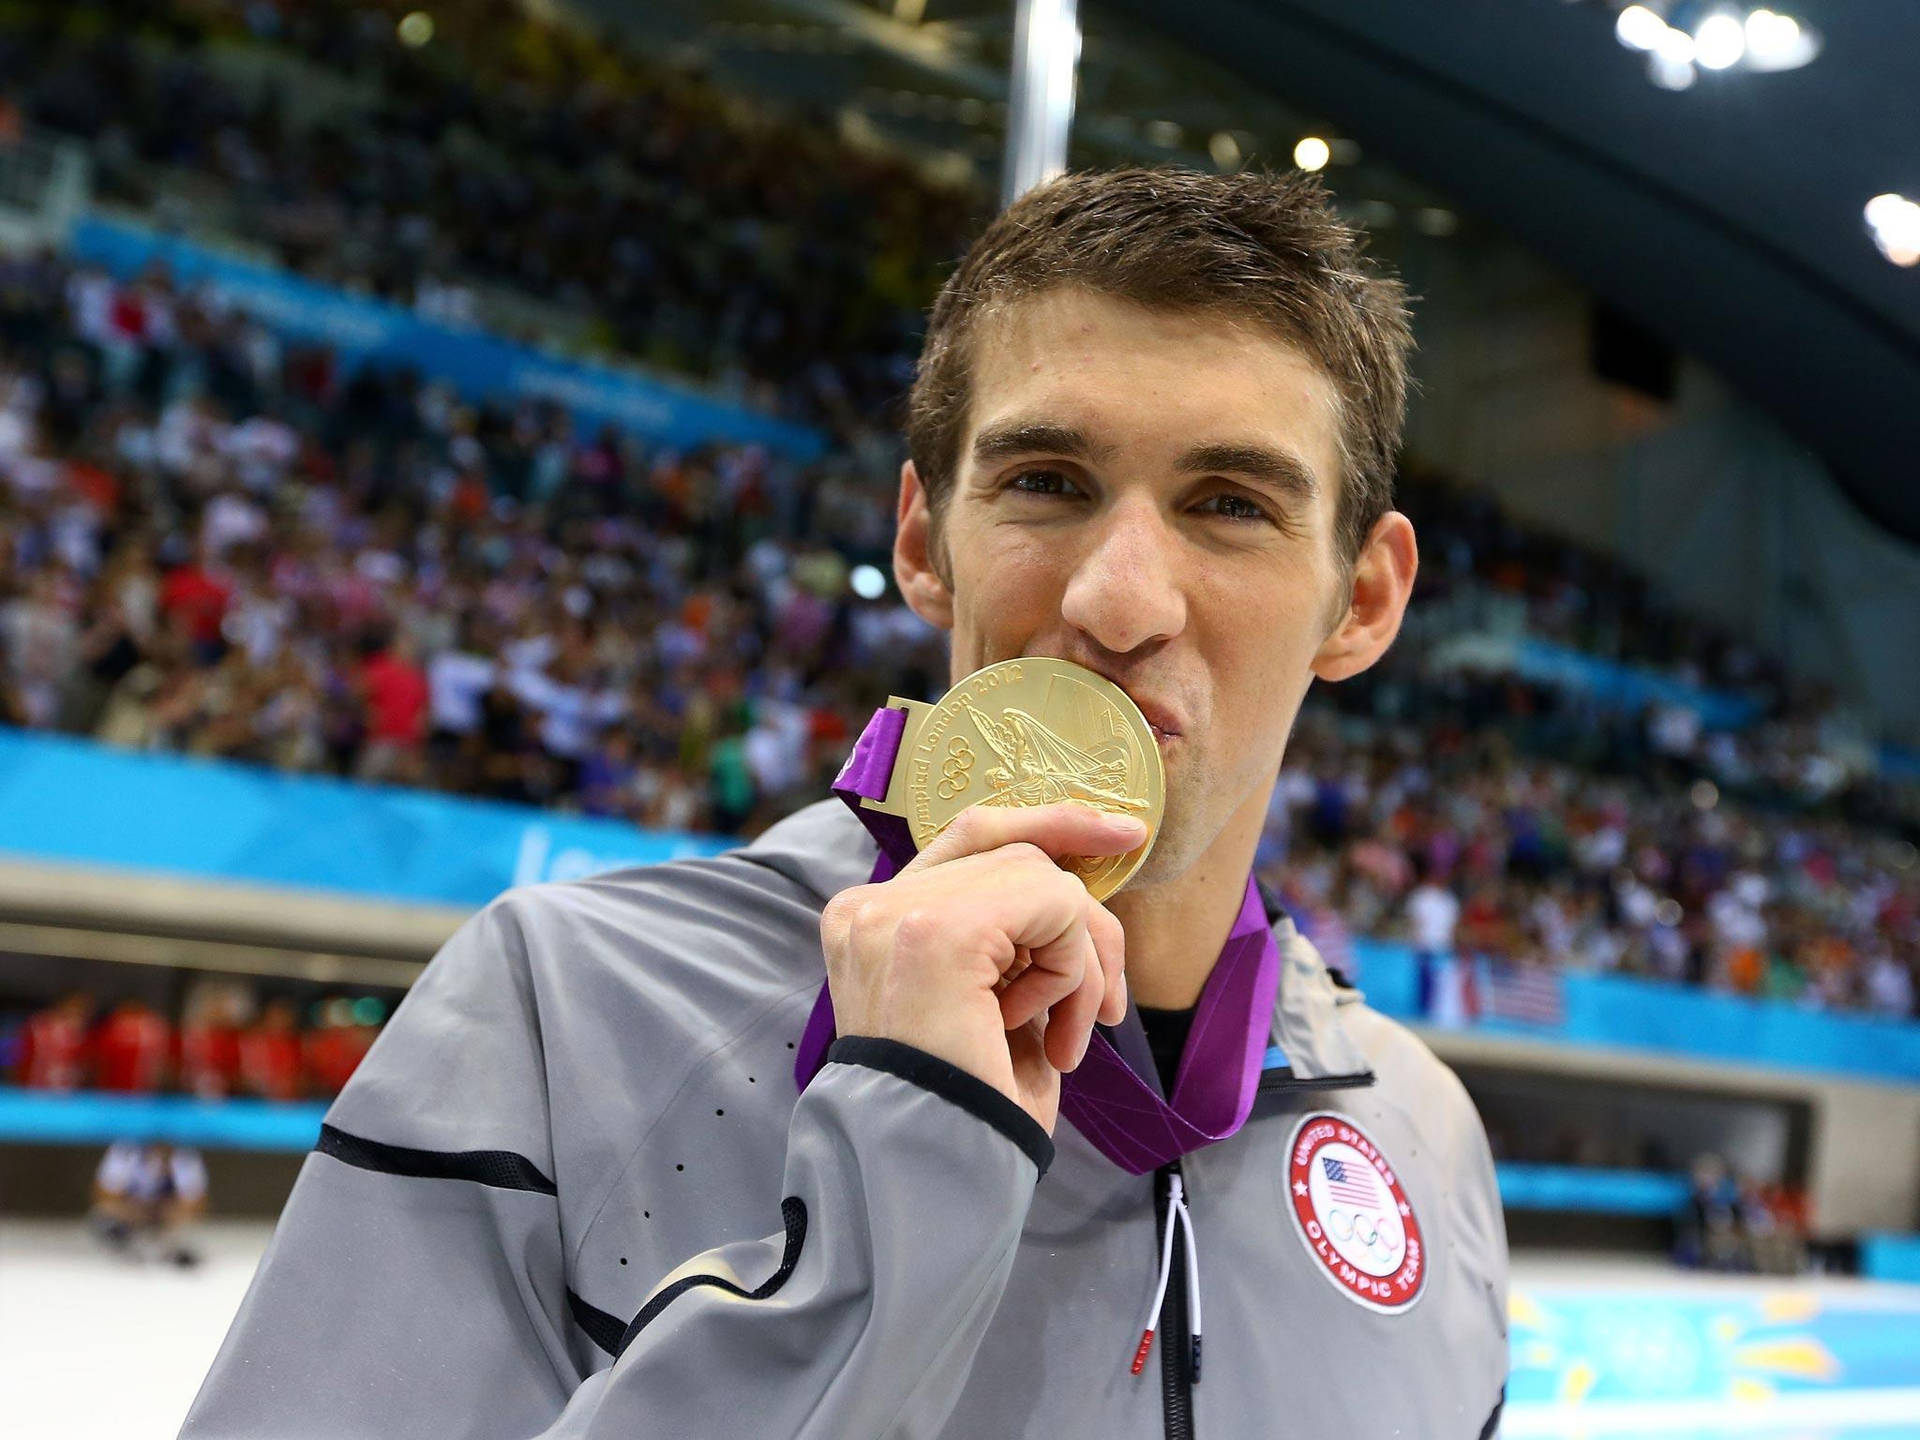 Michael Phelps Medal Kiss Background